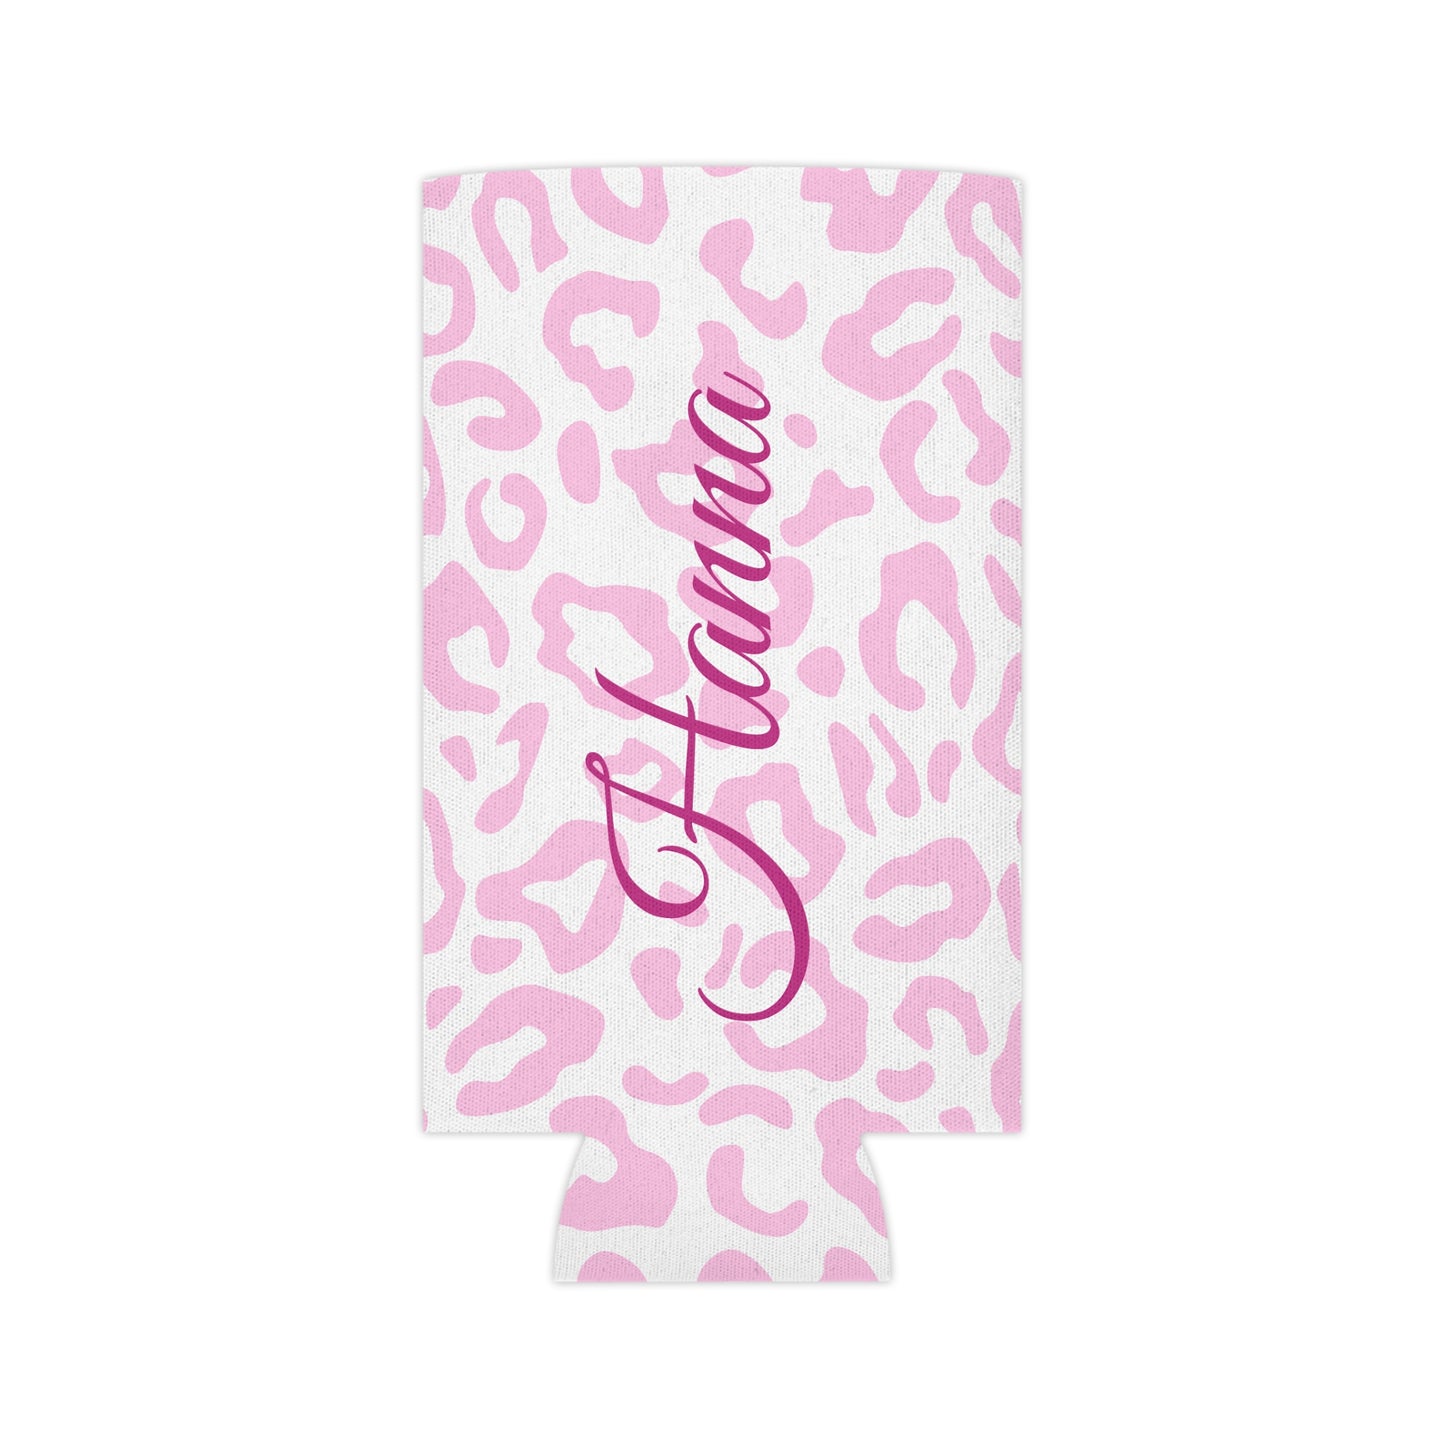 Leopard Print Can Cooler / Personalized Name Koozie